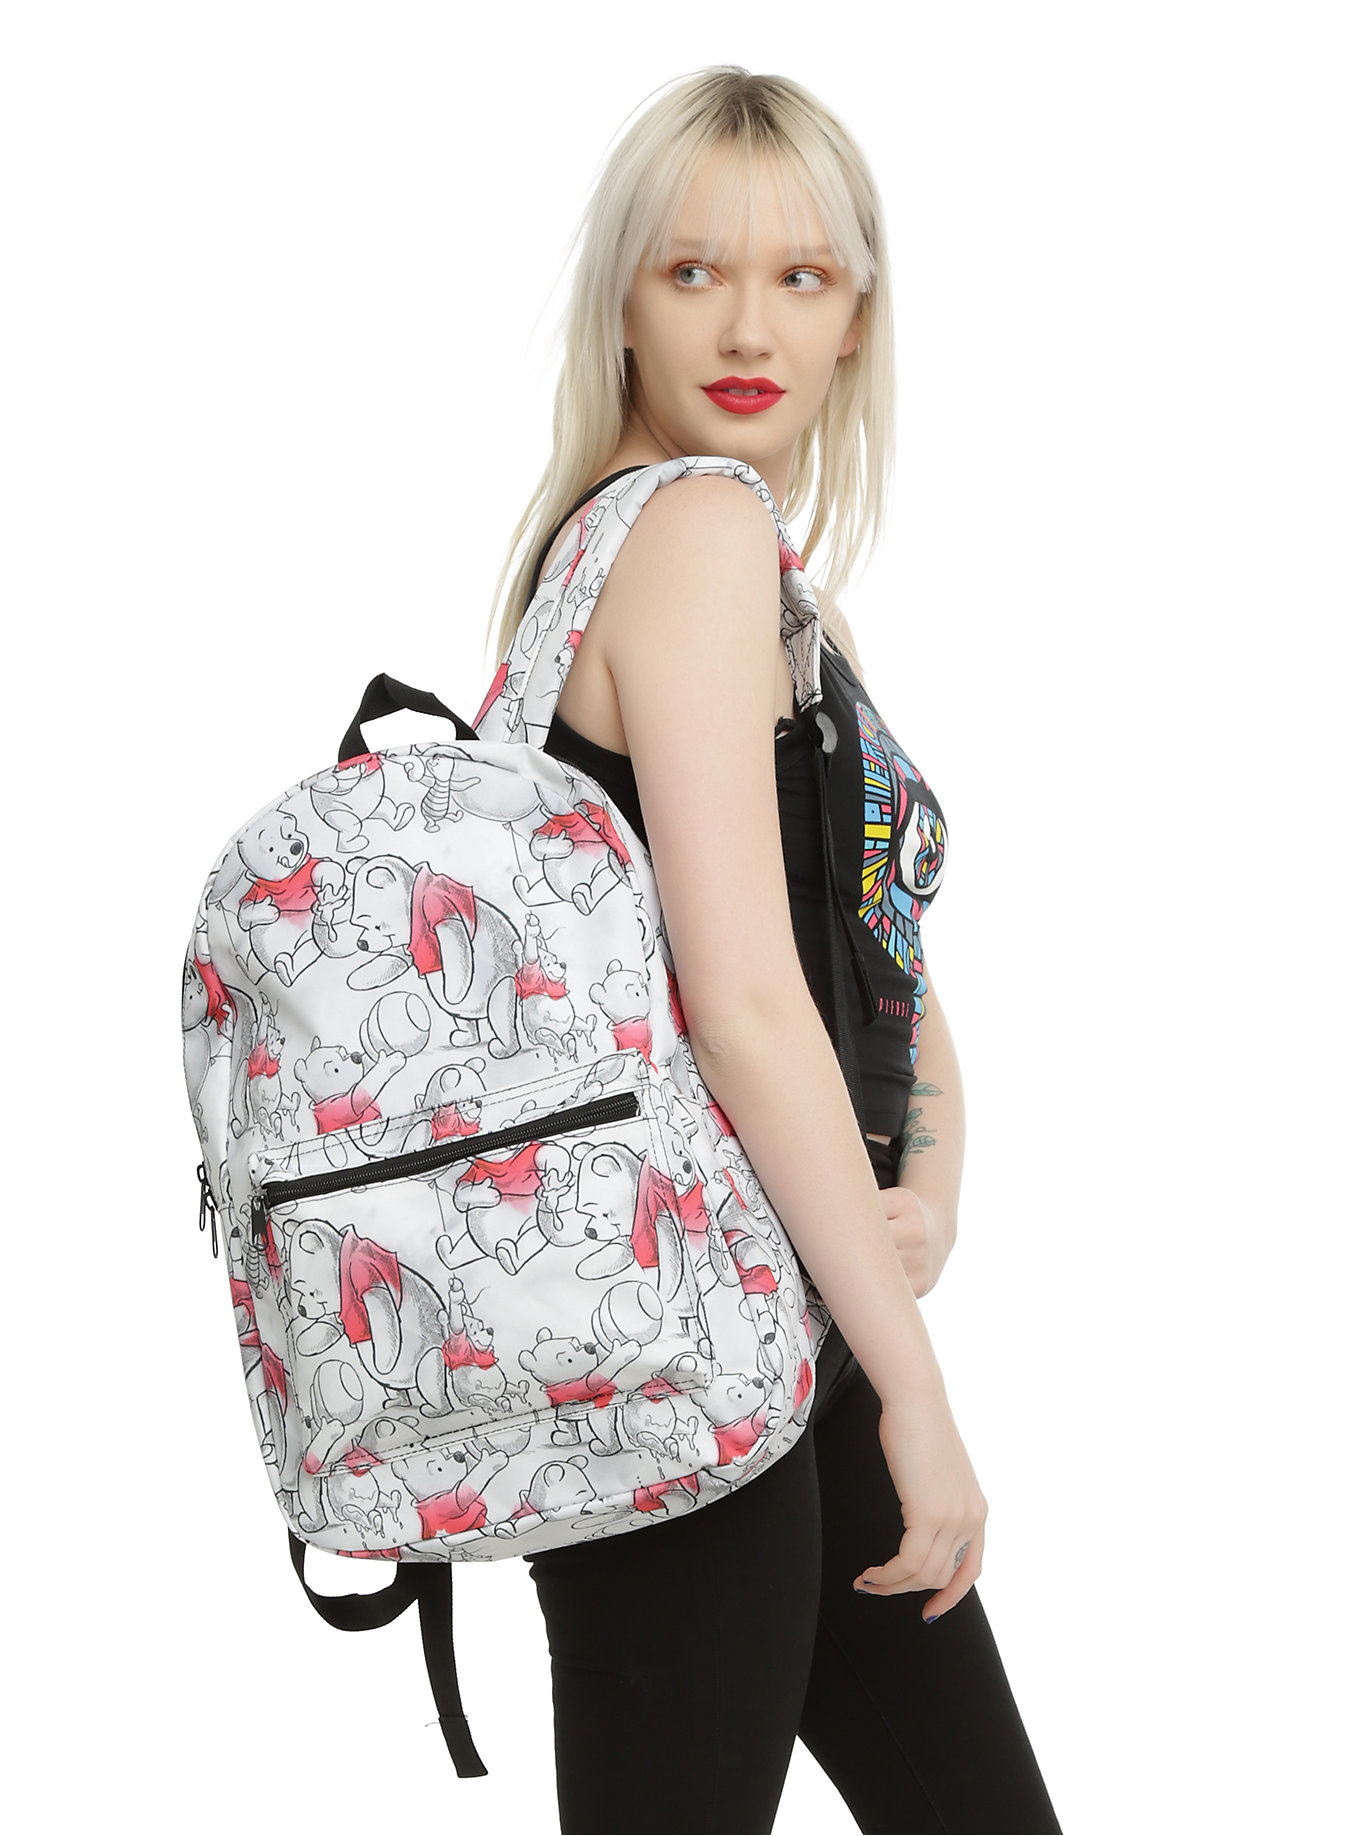 Disney Backpacks On Sale at Hot Topic